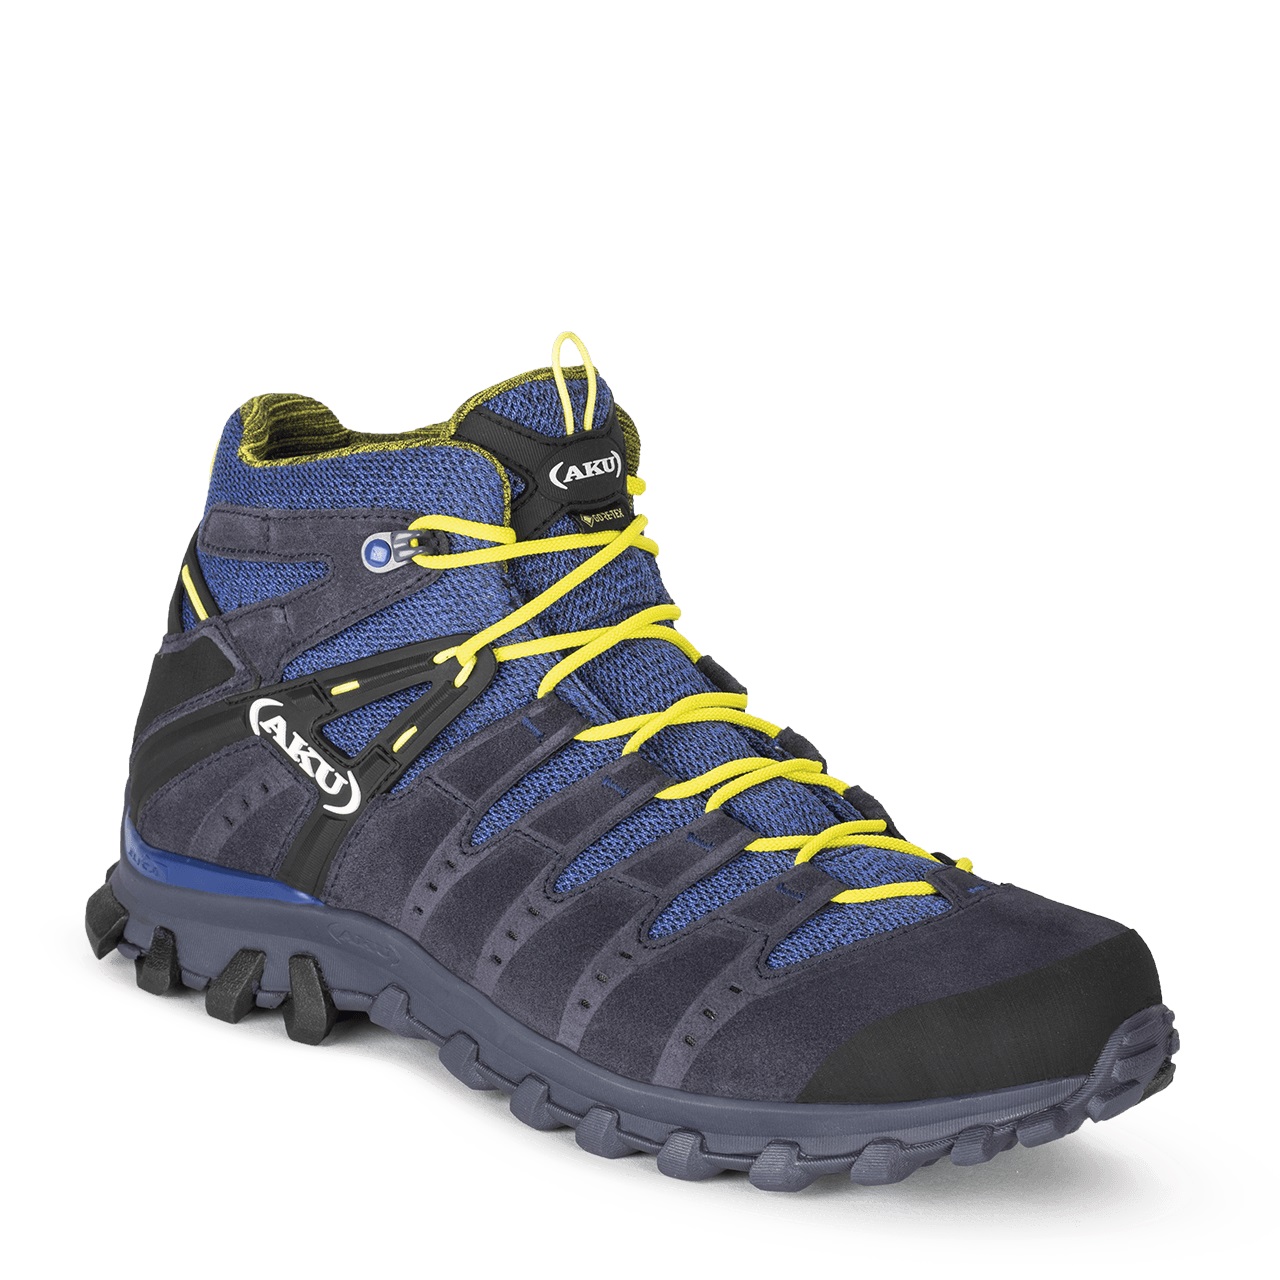 shoes for hiking and trekking